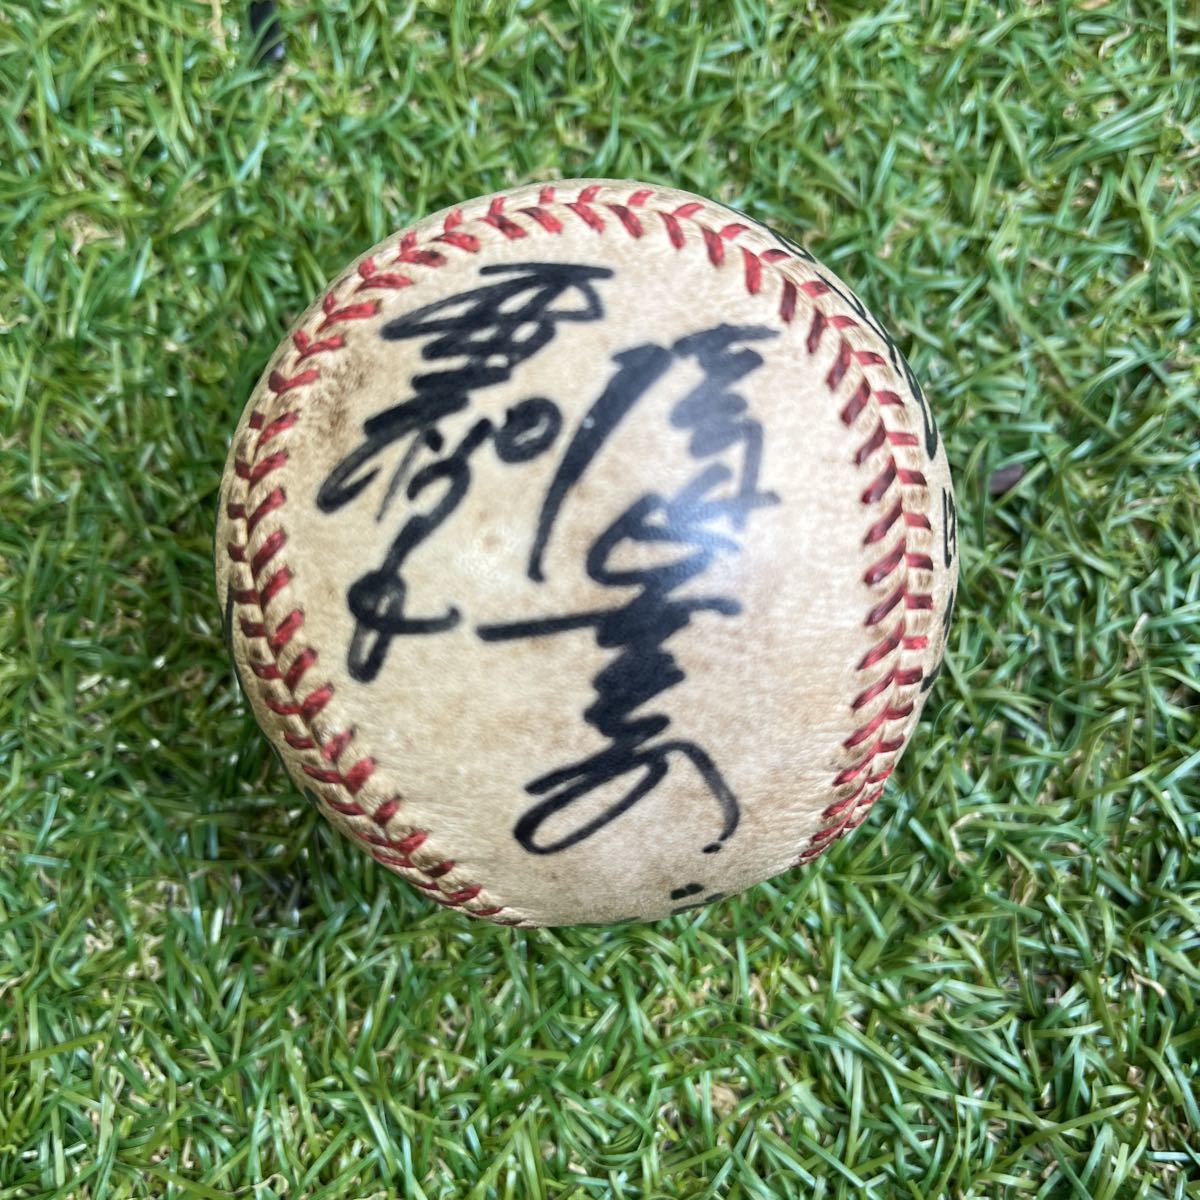  Hanshin Tigers 1962 year autograph autograph ball ( blue rice field .*. mountain real * Michael so rom ko* Yoshida . man other all 9 name )* decoration case * Japan series half ticket attaching 